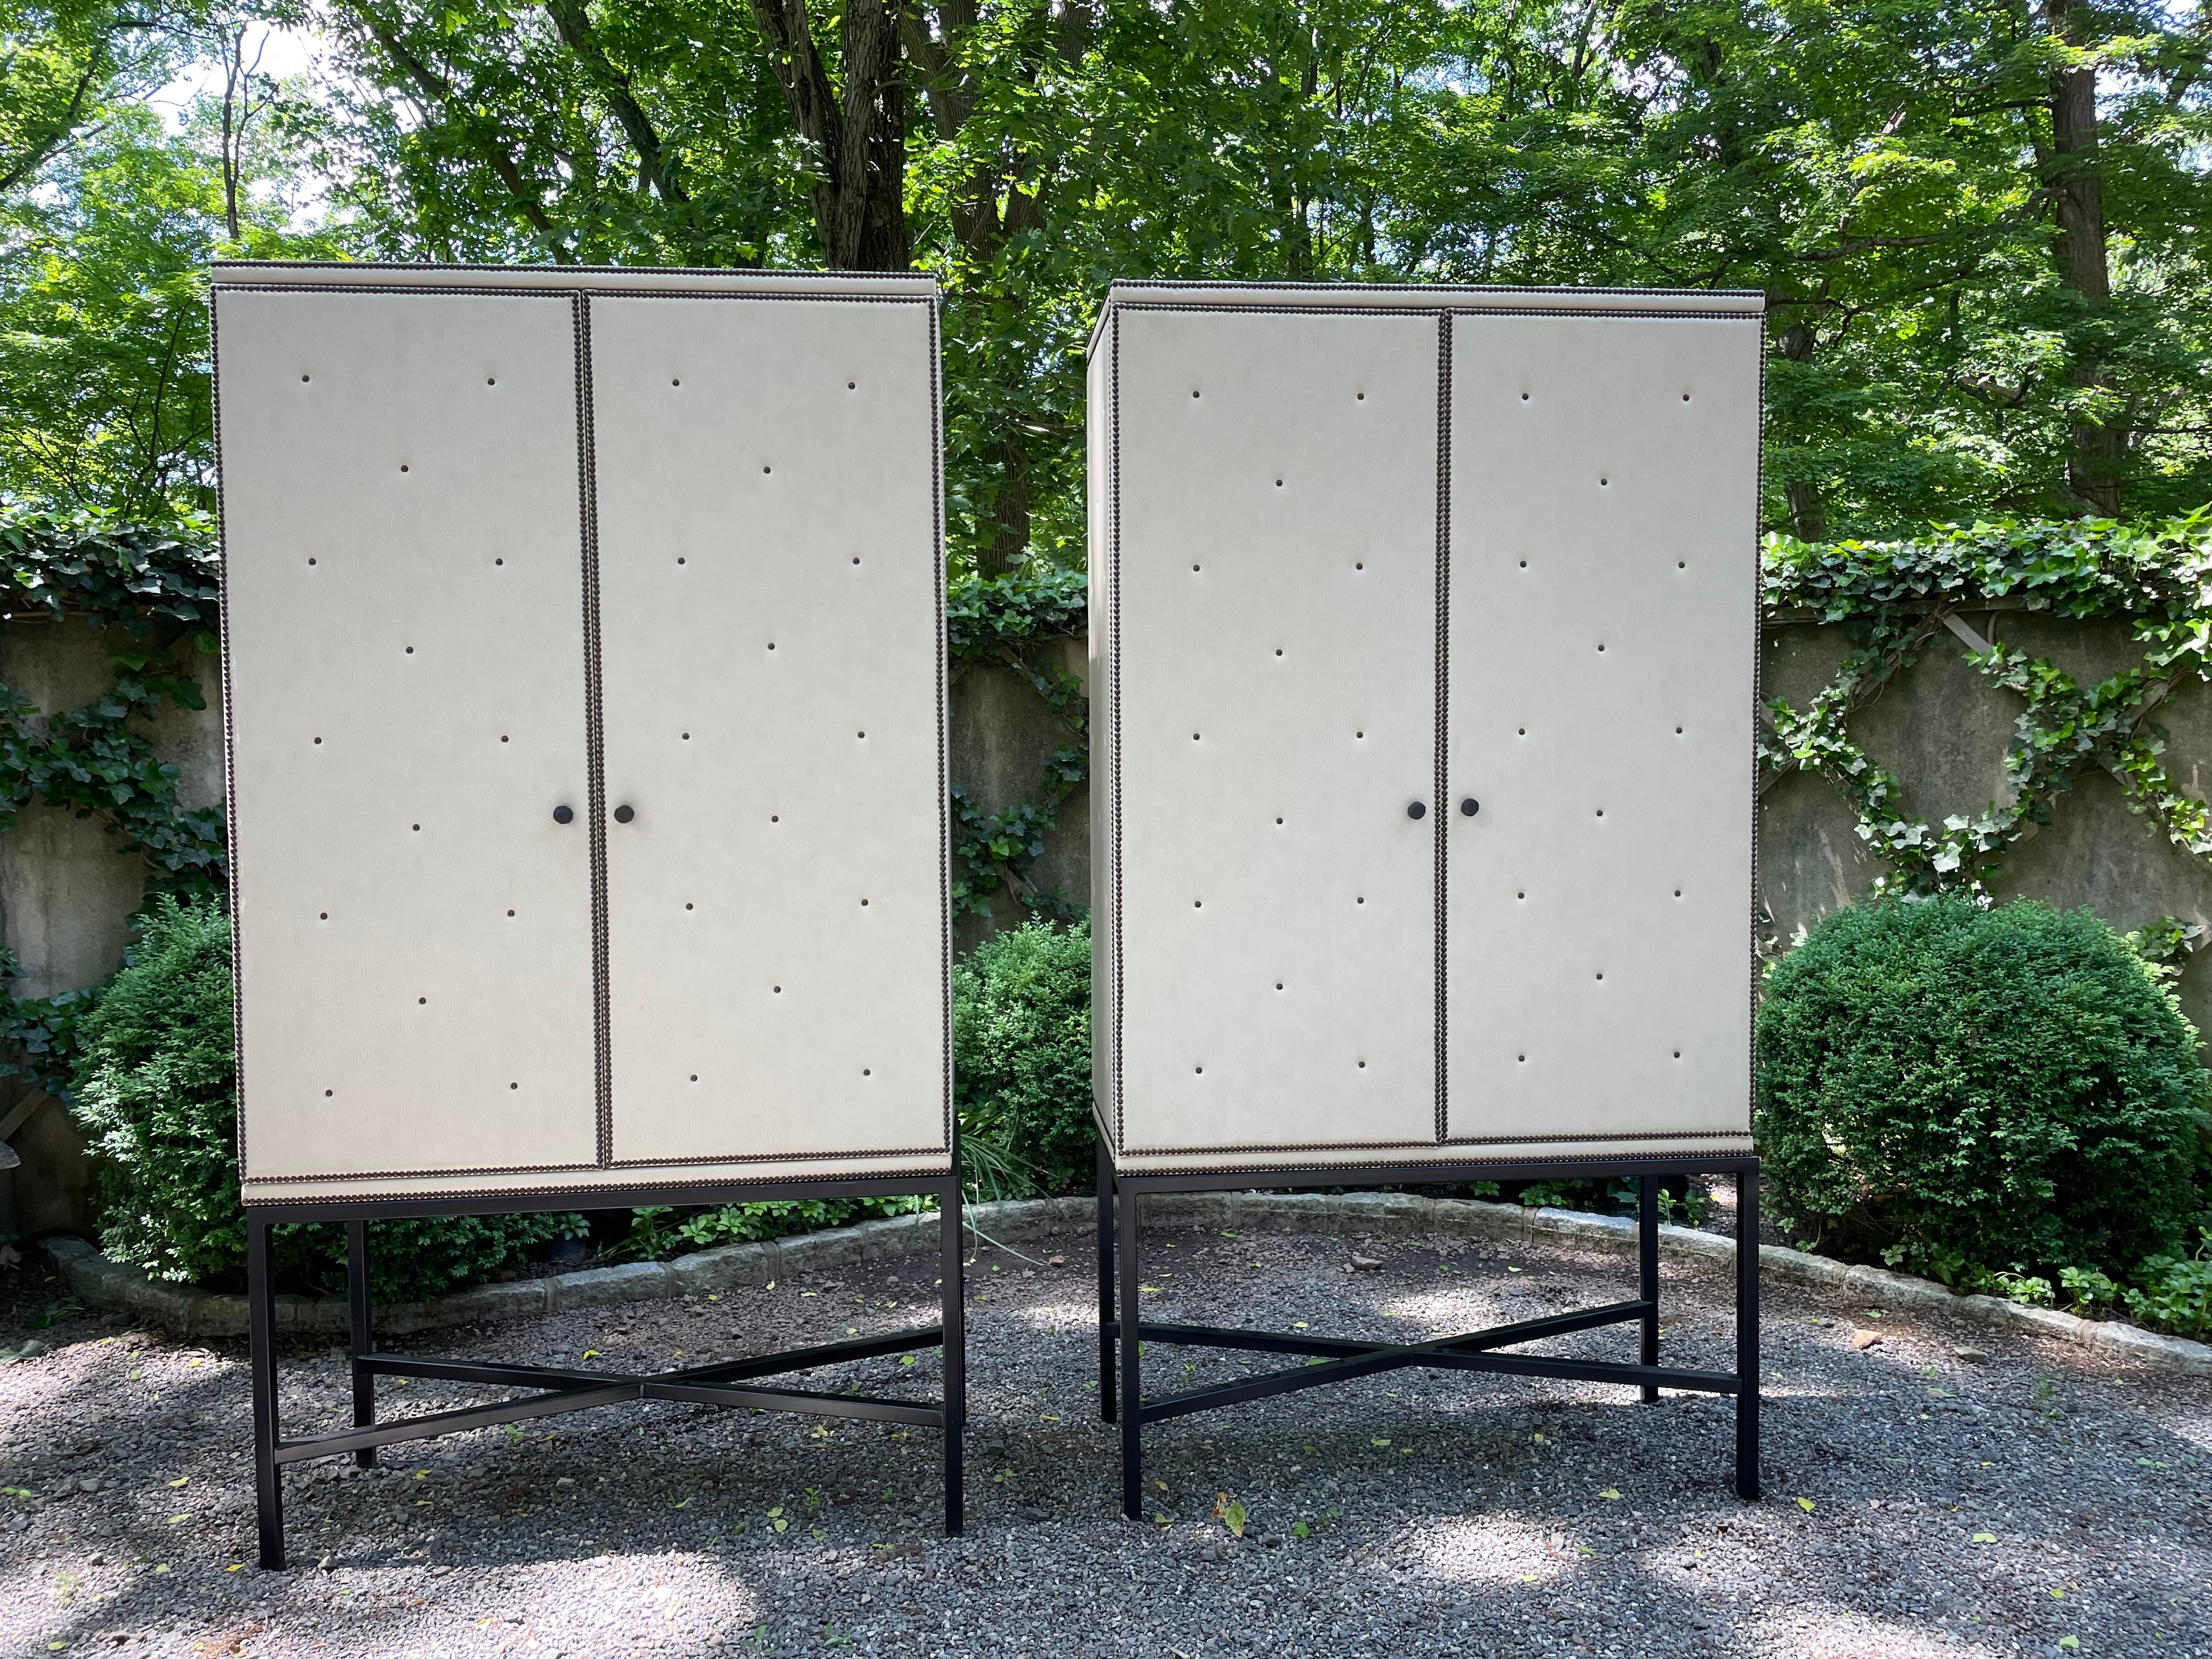 Very glamorous pair of custom media cabinets upholstered in padded beige leather and finished with bronze nailheads. Each cabinet sits on criss crossed steel bases. The backs have circles and rectangles cut to accomodate cords and wires. Upper shelf